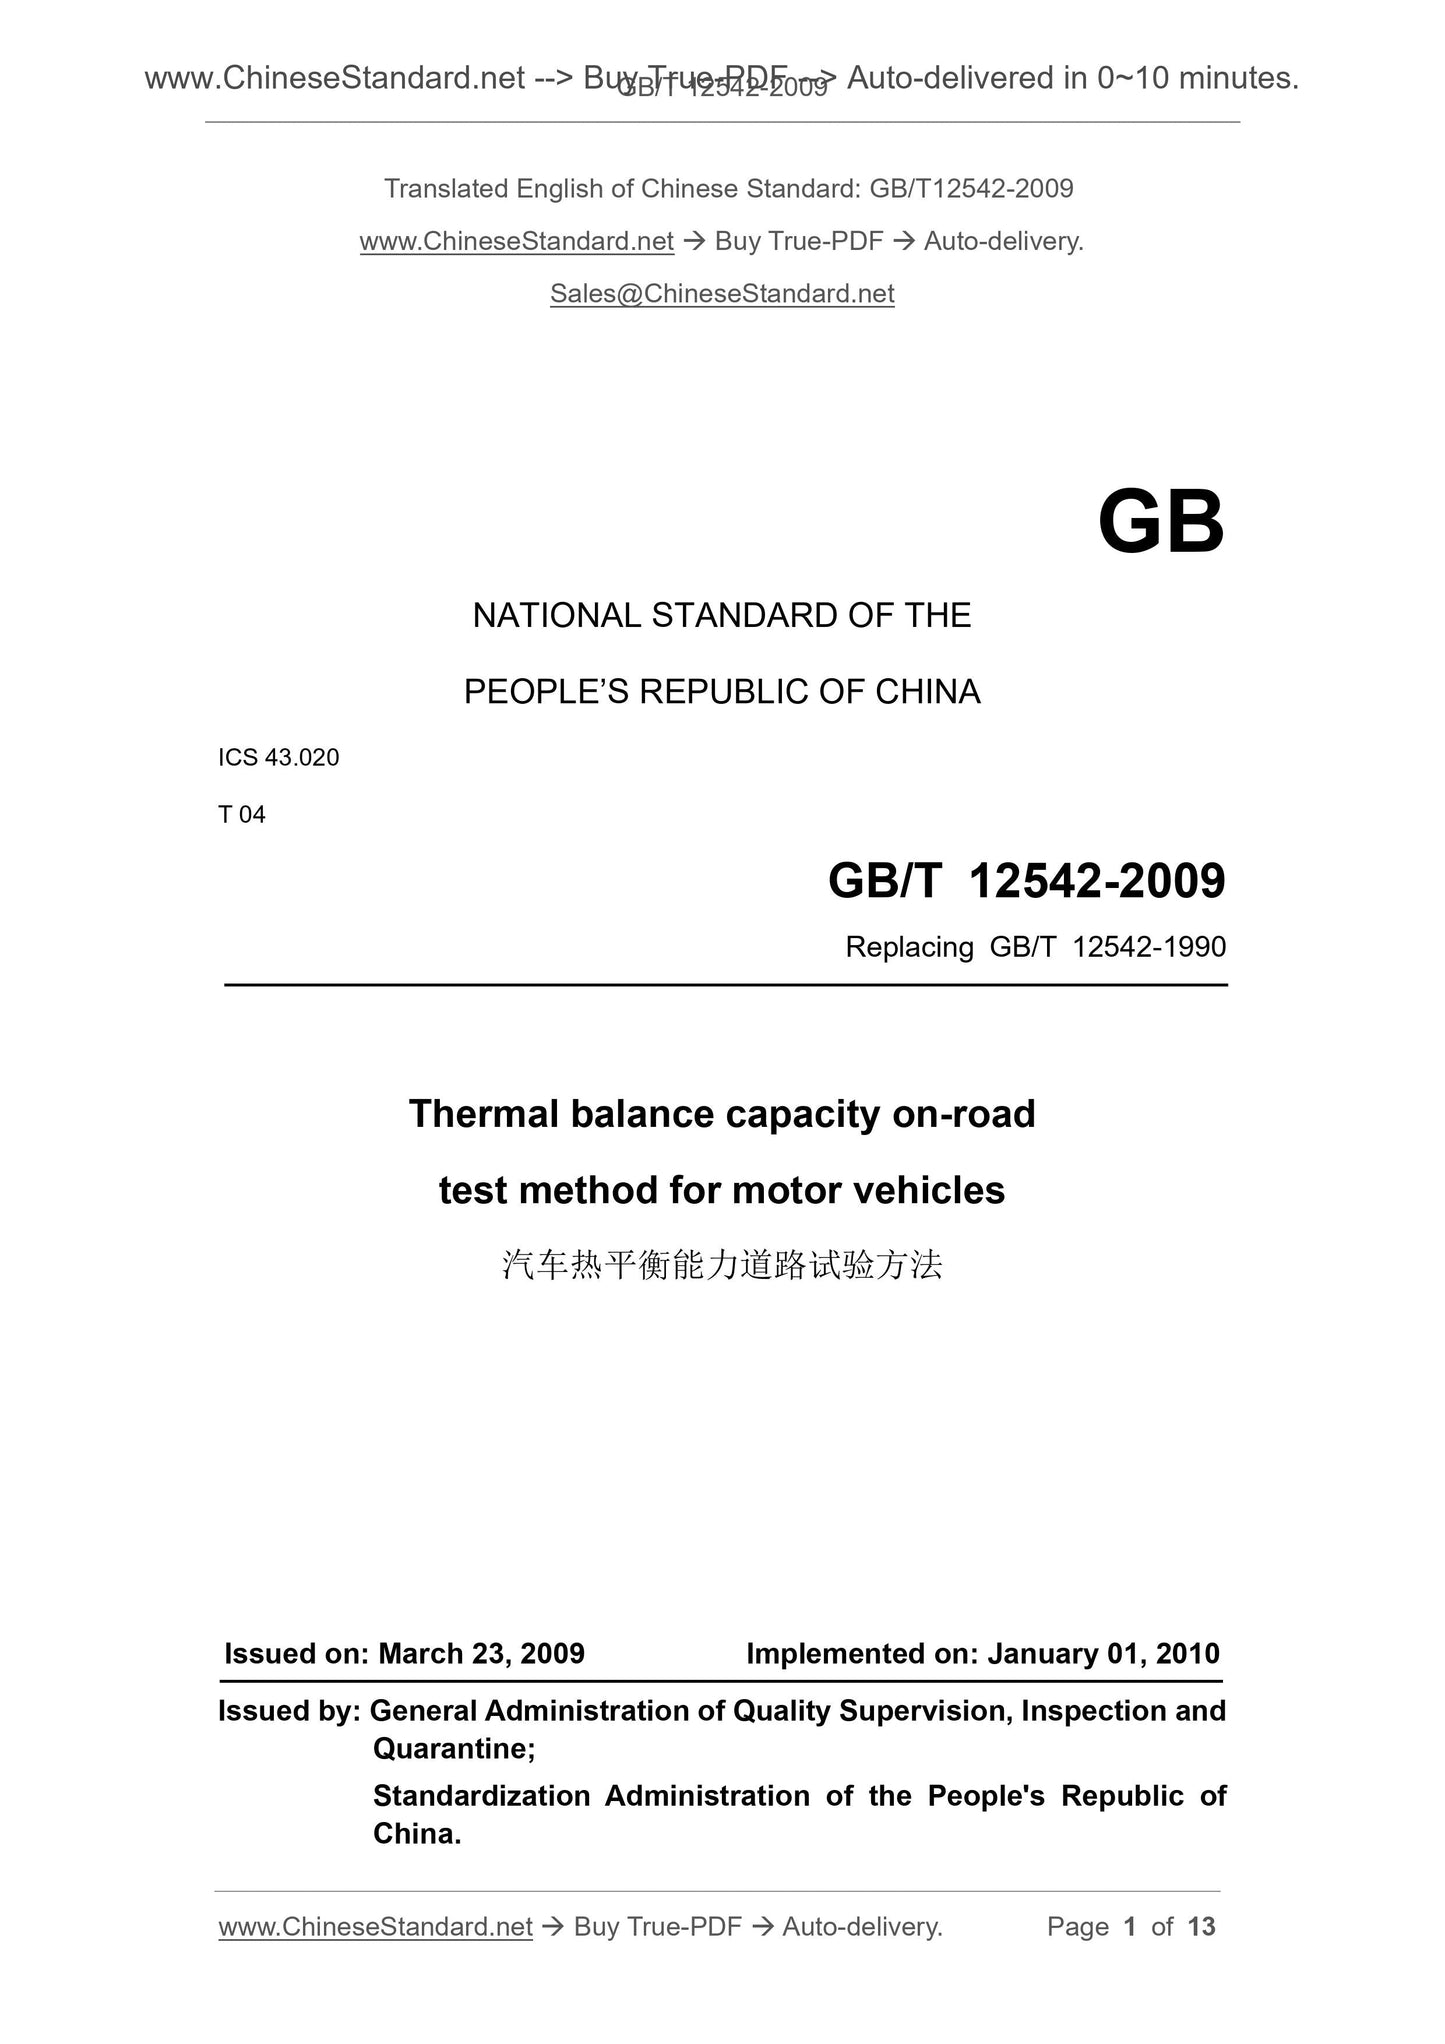 GB/T 12542-2009 Page 1